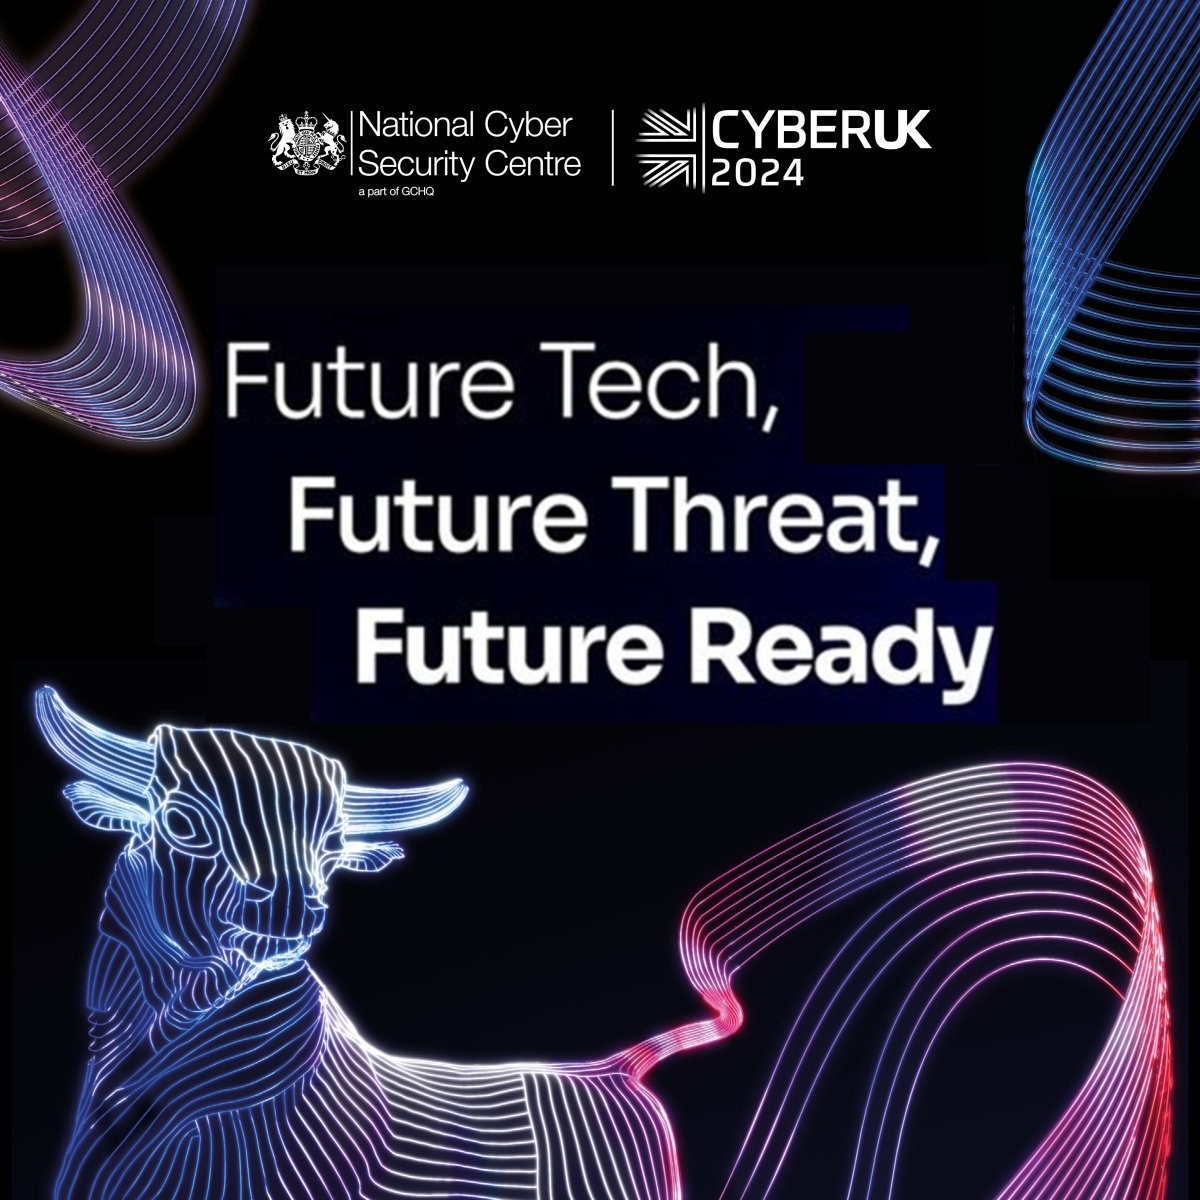 The #CYBERUK24 theme is ‘Future Tech, Future Threat, Future Ready’. Not attending in person? Subscribe to our CYBERUK ONLINE YouTube channel to join the conversation and gain access to all open content live sessions, interviews and more! Subscribe now👇 youtube.com/@CYBERUKONLINE